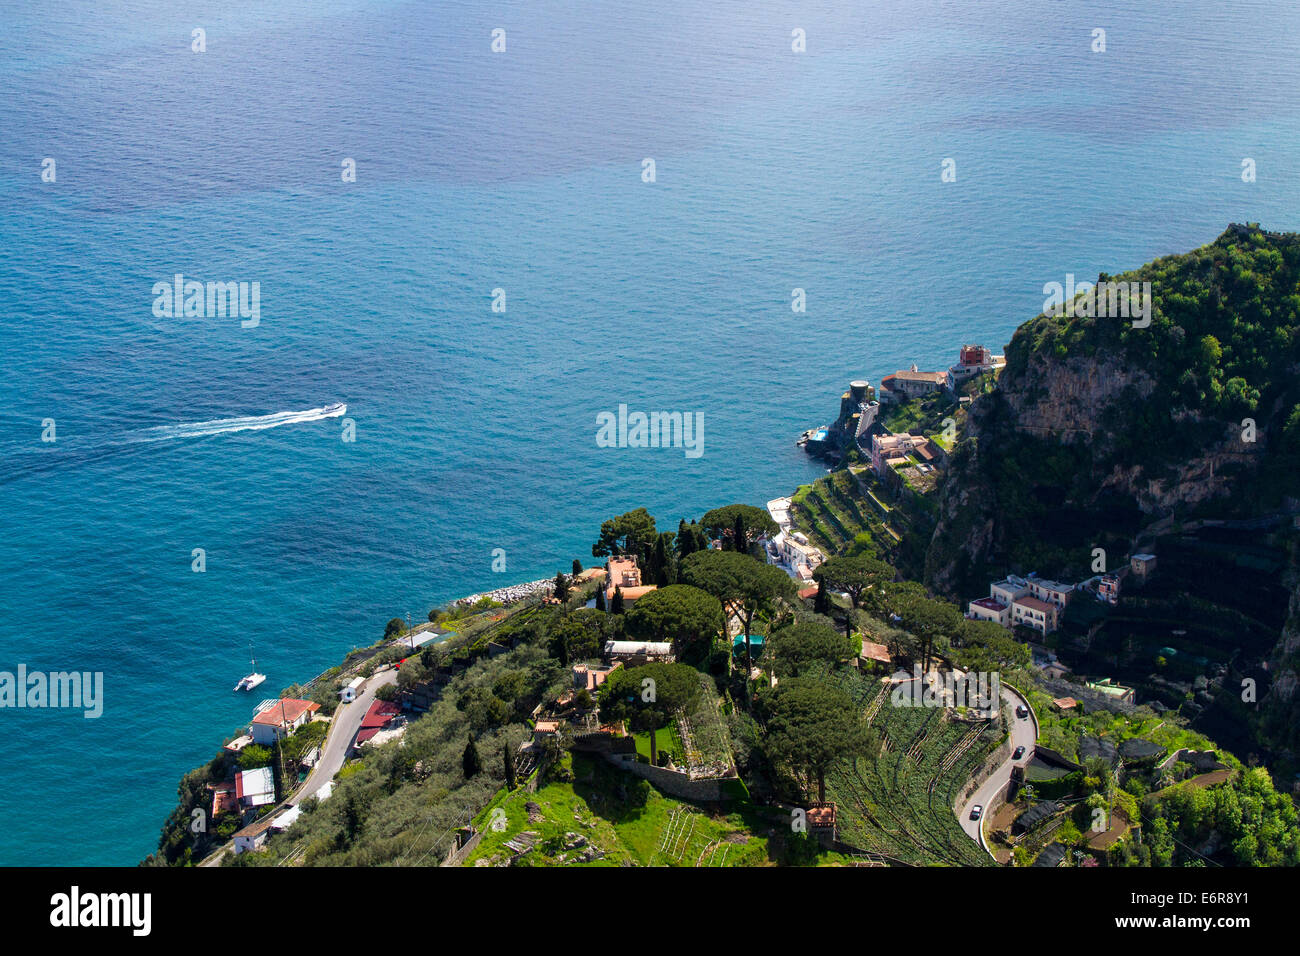 Famous Amalfi Coast view from the cliffside town of Ravello, Italy Stock Photo